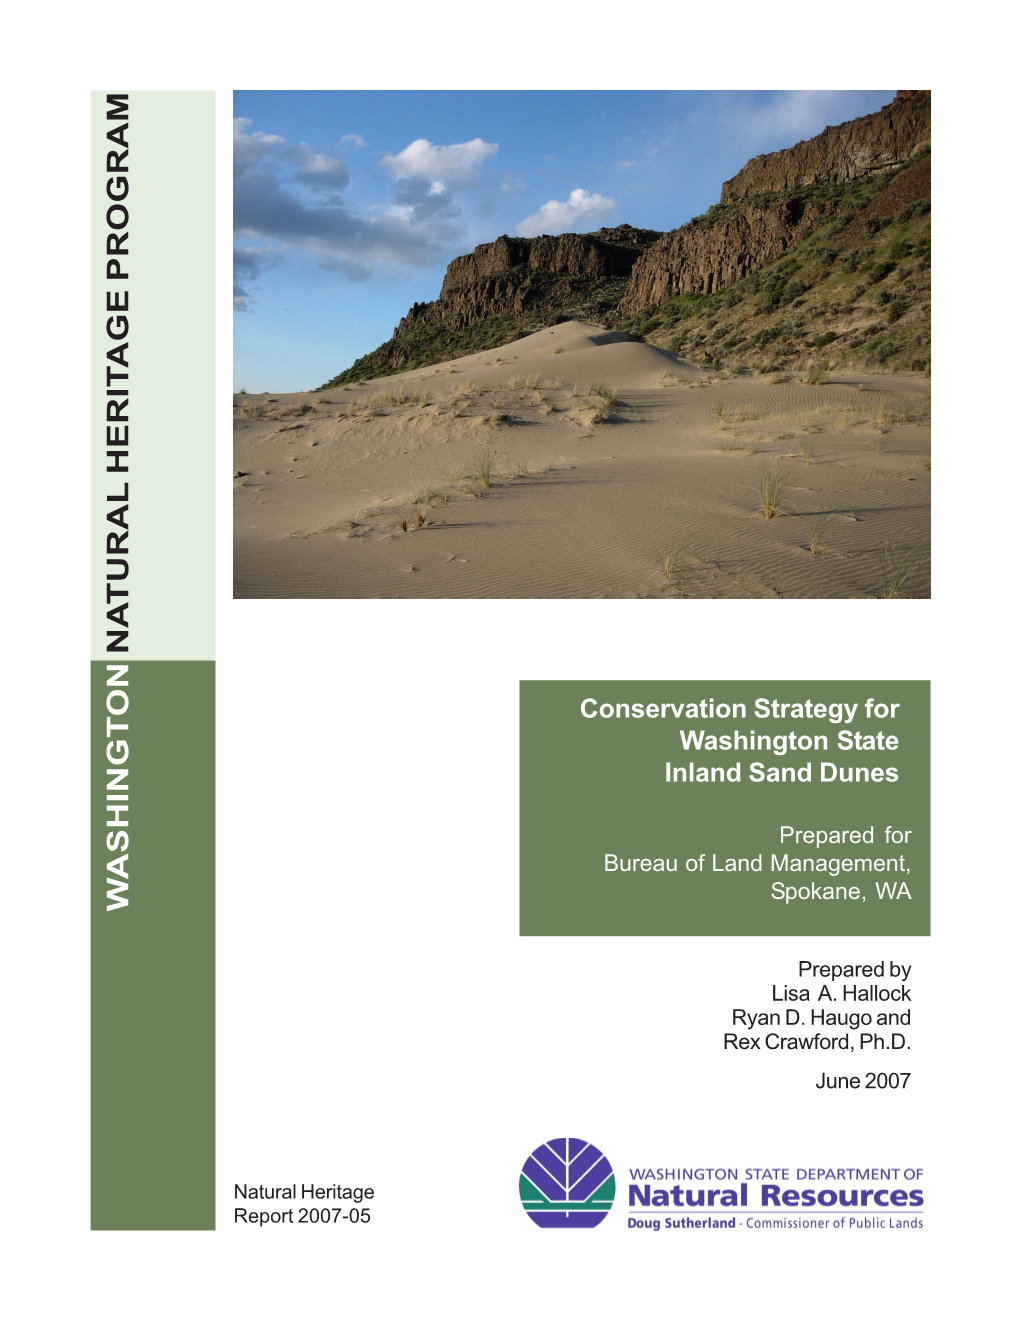 Conservation Strategy for Washington State Inland Sand Dunes